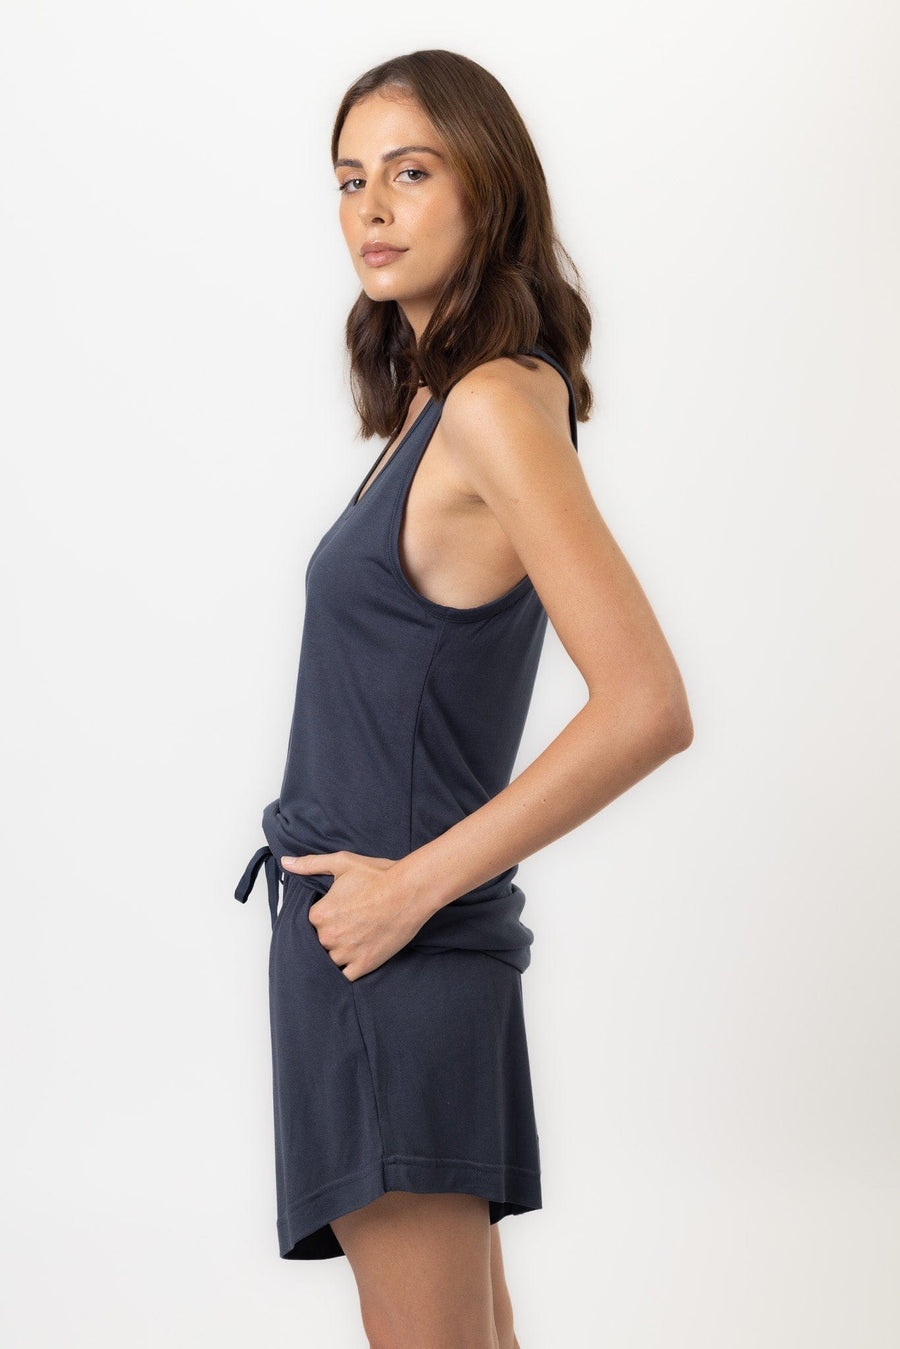 Twighlight Top | Graphite Twighlight Top Pajamas Australia Online | Reverie the Label  TOPS Twilight Top